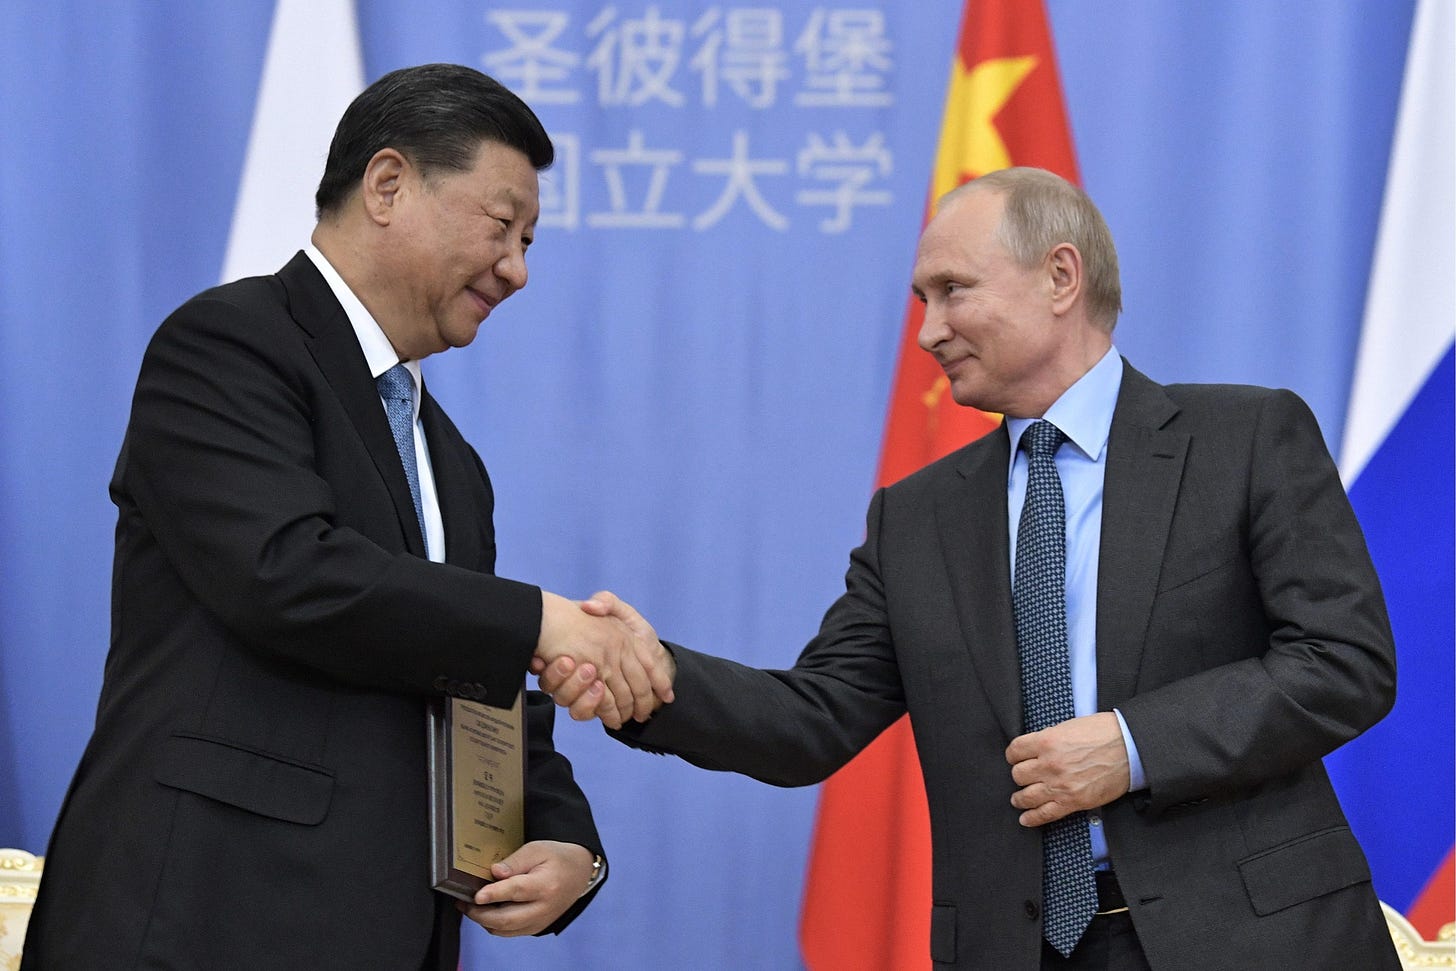 Putin and Xi's 'no limits' friendship is put to the test in Ukraine |  Fortune